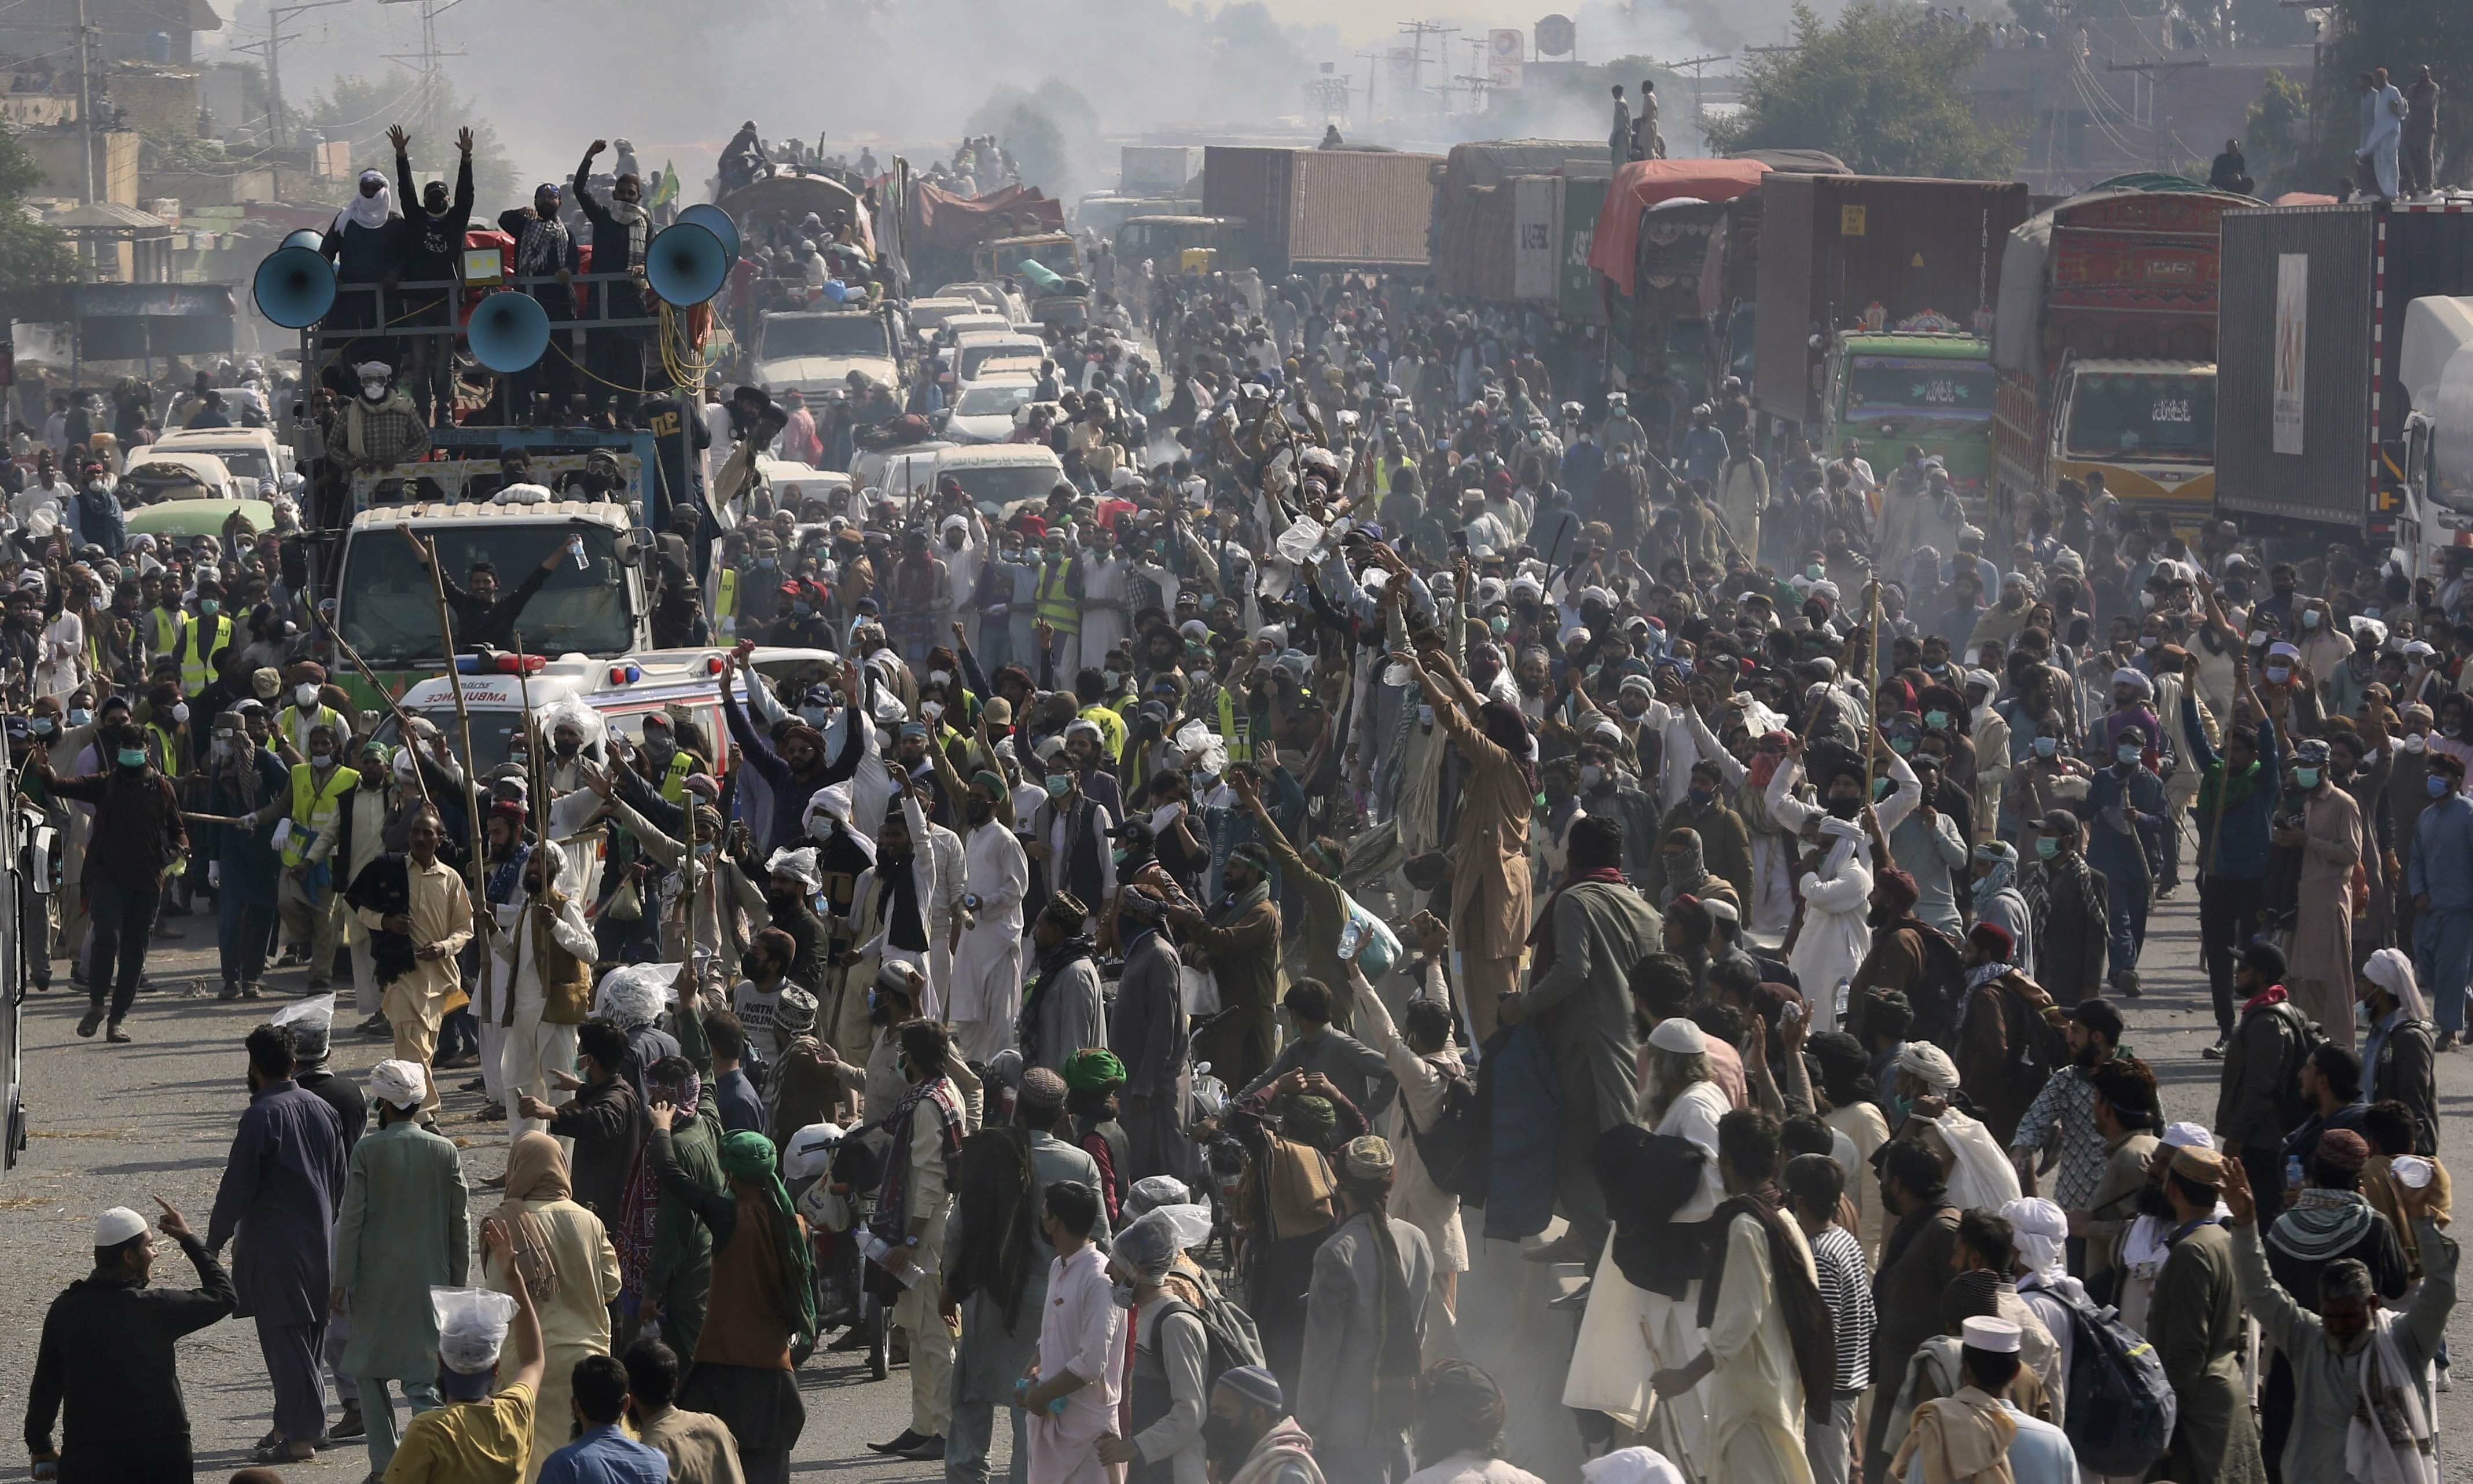 Tehreek-i-Labbaik Pakistan supporters take part in  a protest march toward Islamabad, on a highway in the town of Sadhoke on Wednesday. — AP